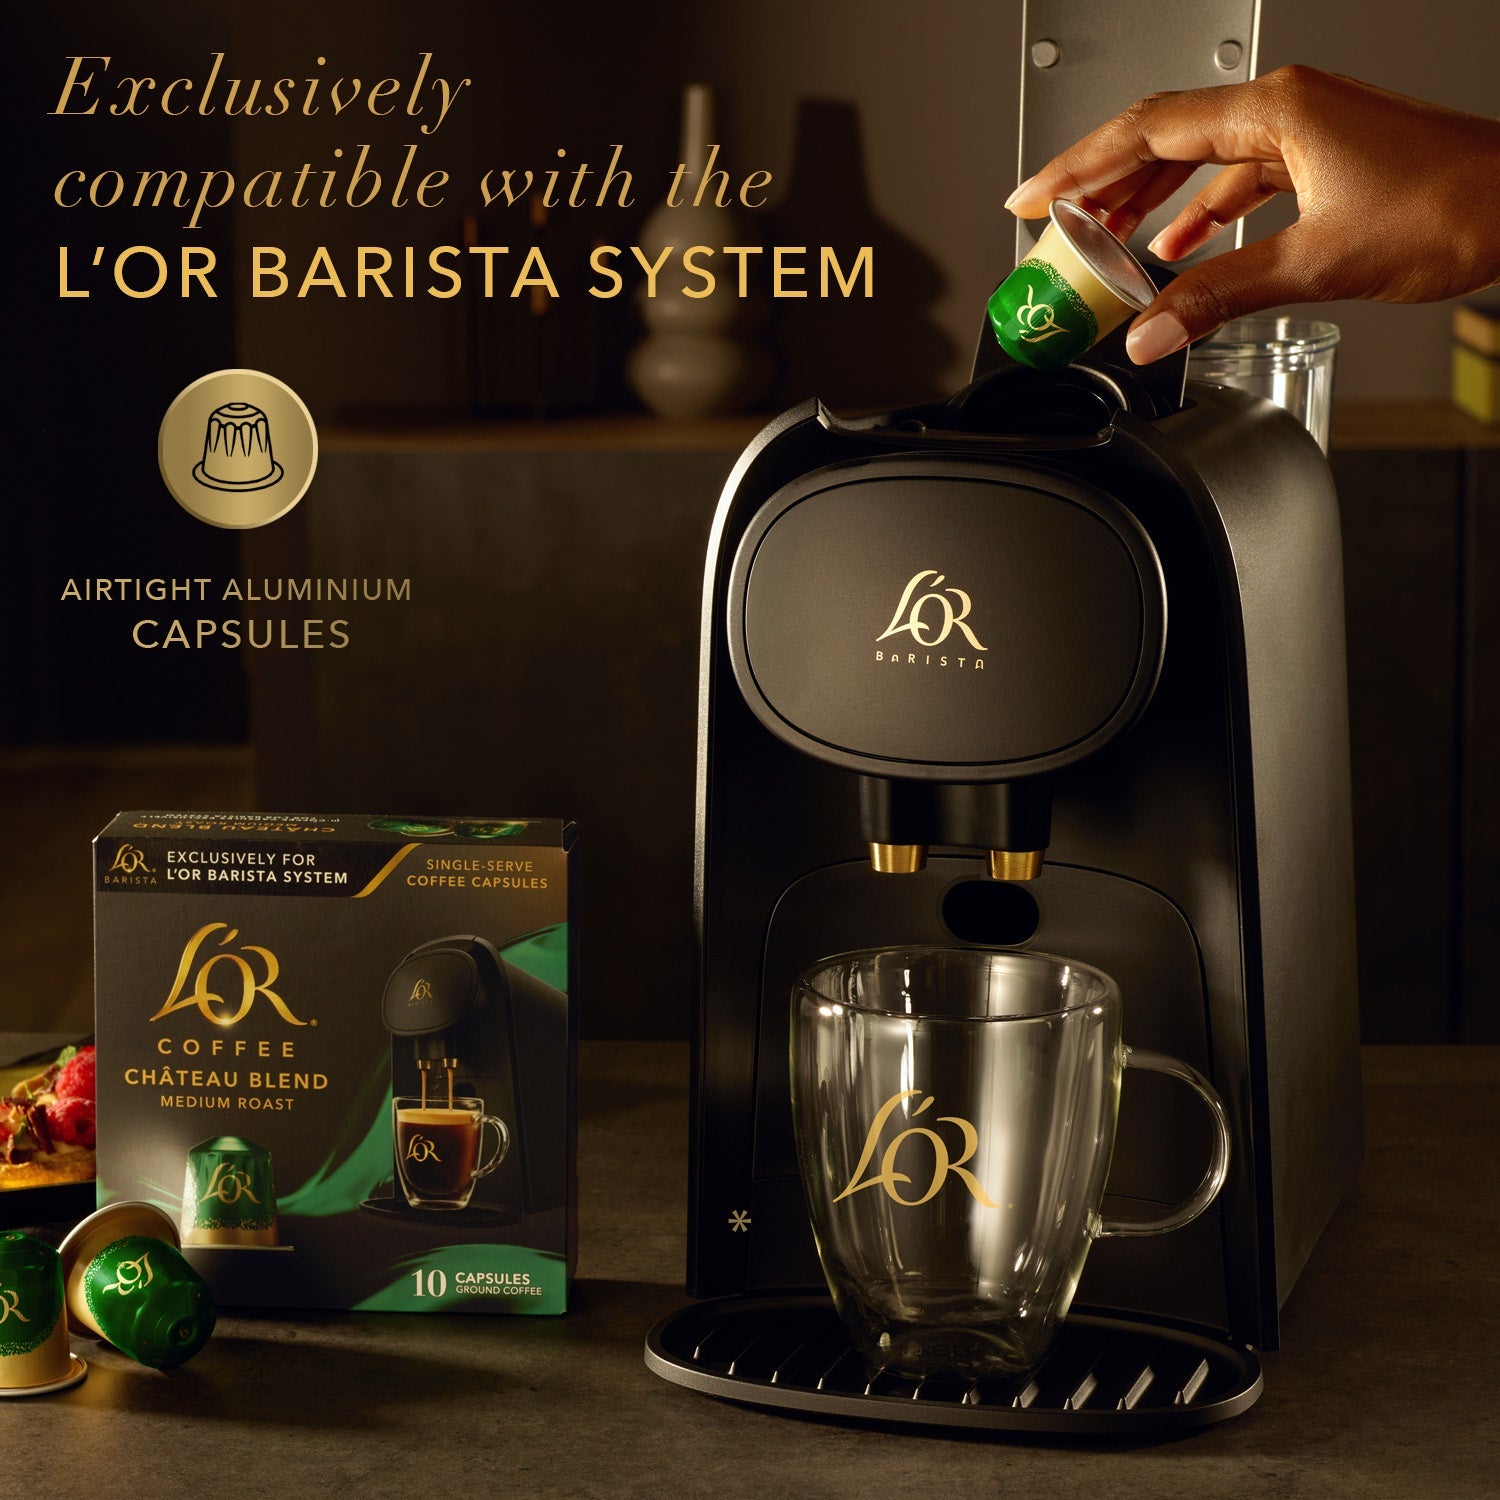 L'OR coffee capsules are exclusively compatible with the L'OR BARISTA System